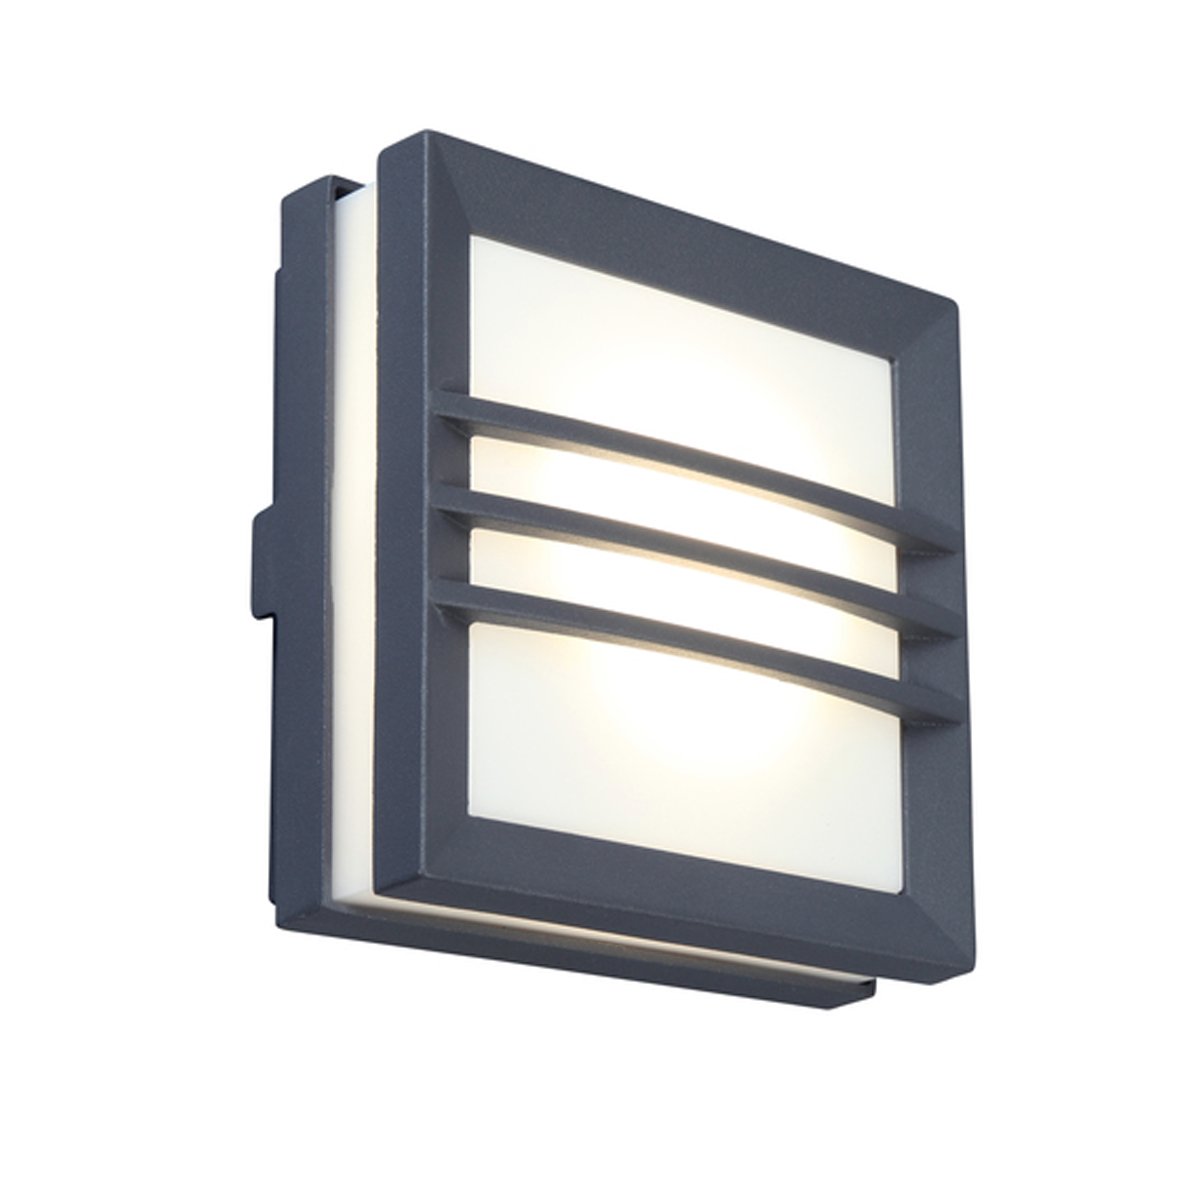 CGC SALLY Dark Grey Cage Square LED Outdoor Wall Light